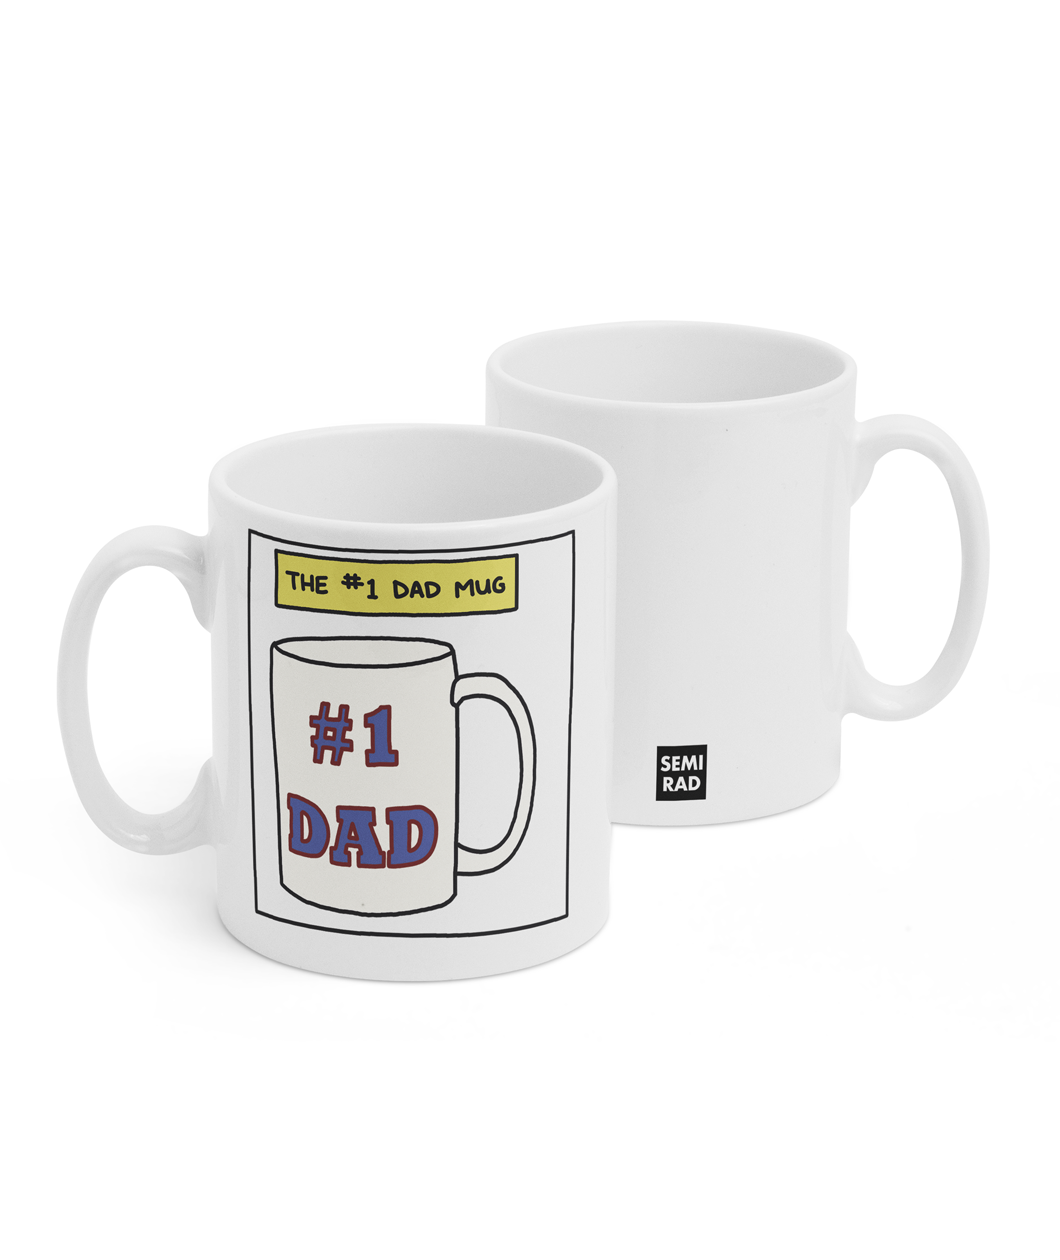 Two white mugs sitting next to each other showing two sides of the same mug. The front side has a drawing of a mug with 